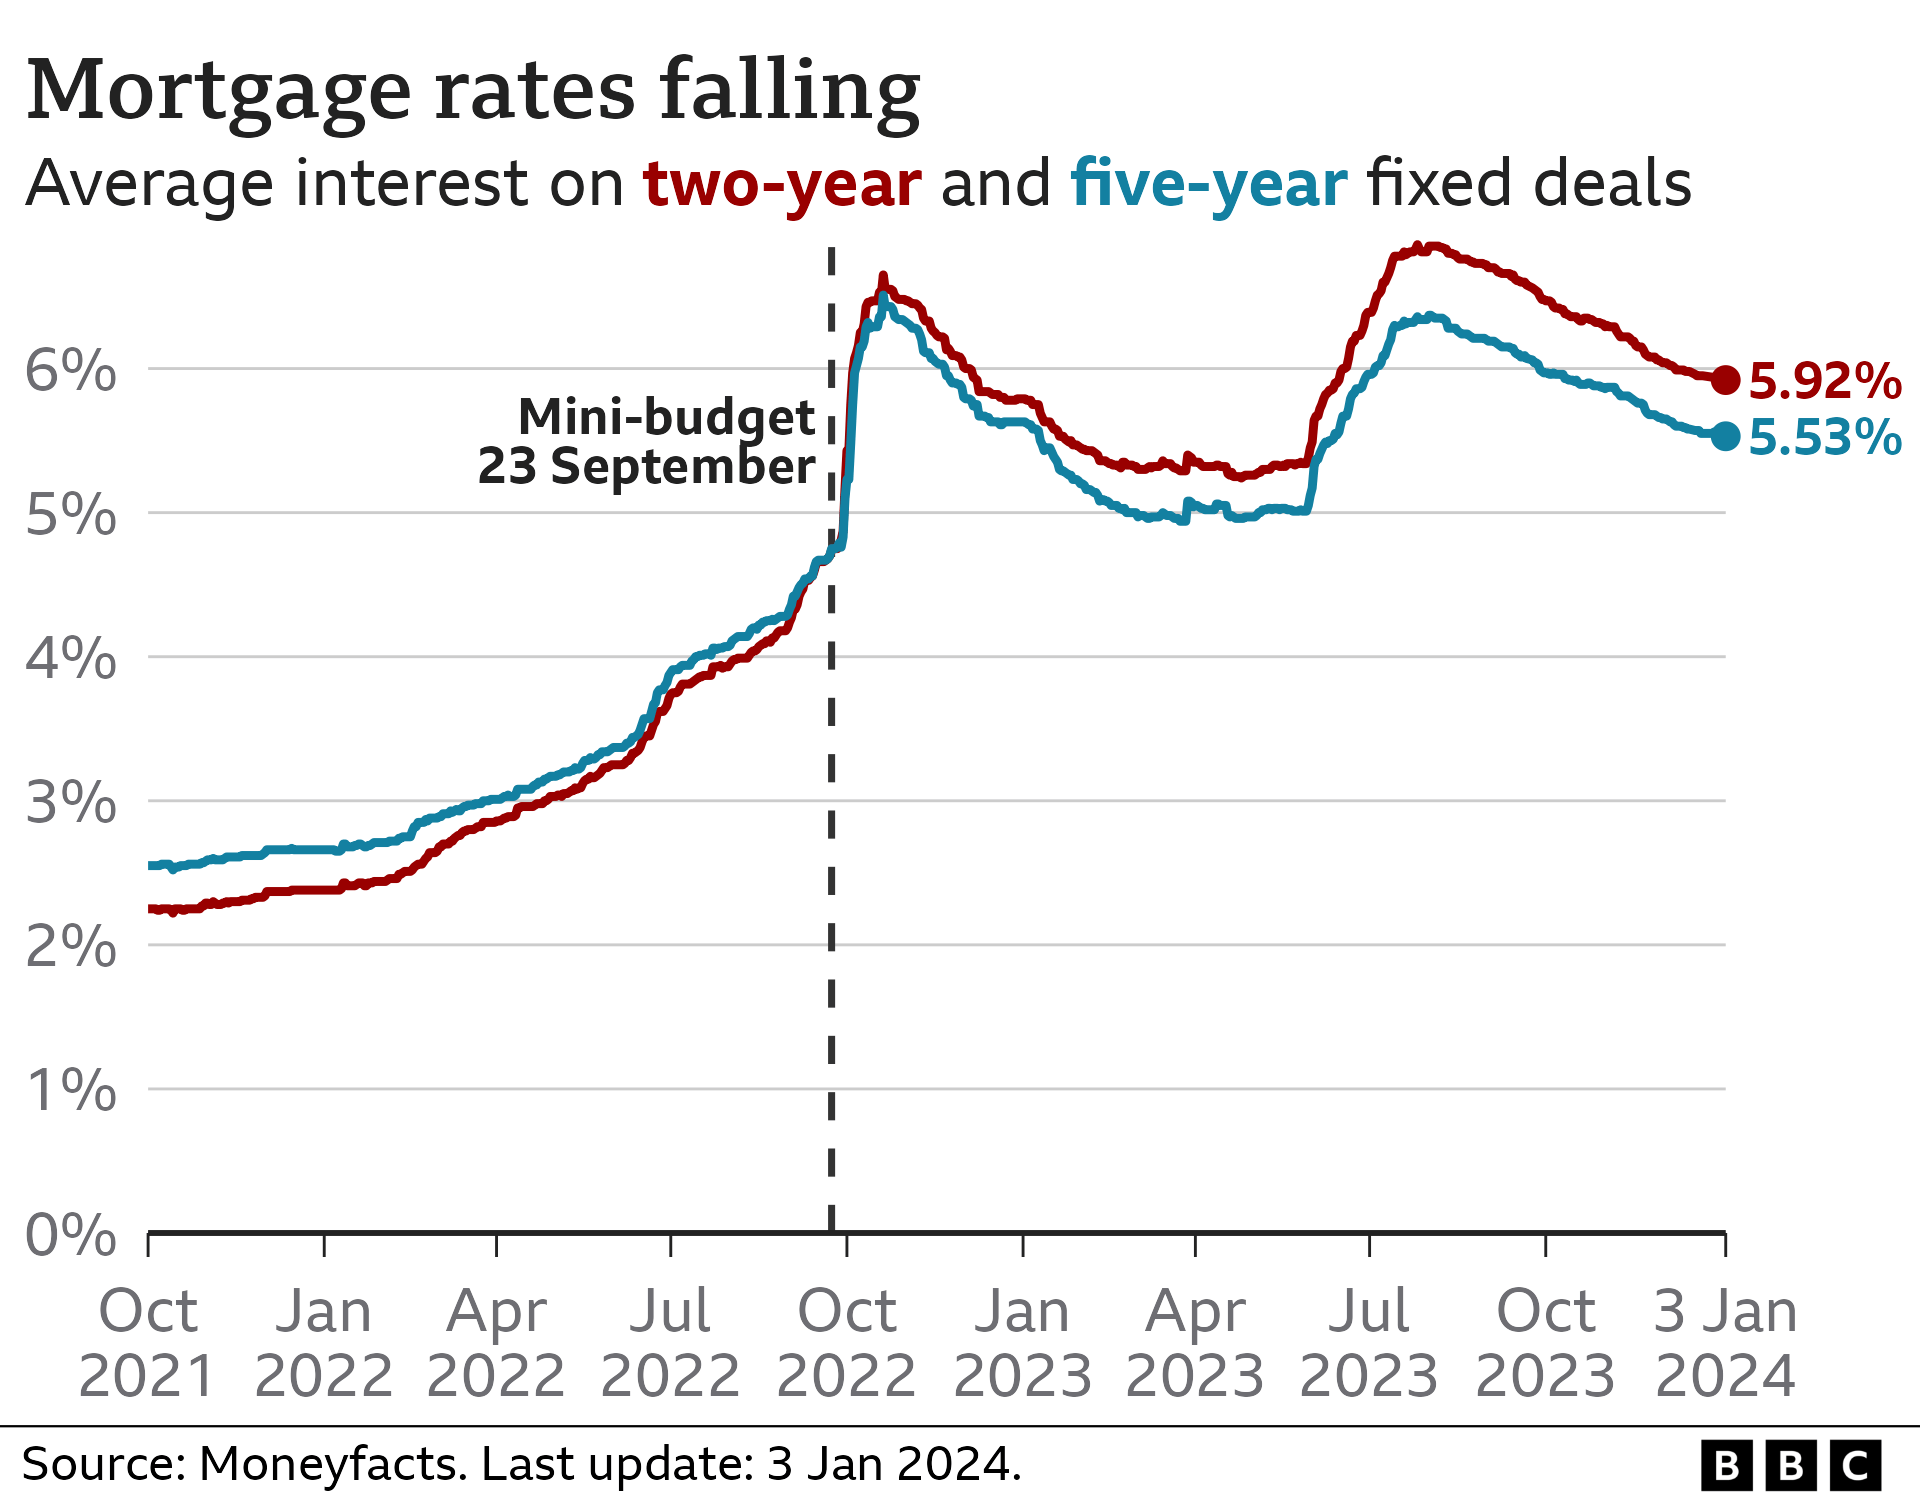 Line chart showing the average interest rate charged on two-year and five-year fixed deals. The two-year rate was 5.92% on 3 January 2024, and it peaked at 6.65% in October 2022. The five-year rate was 5.53%, and it peaked at 6.51%.